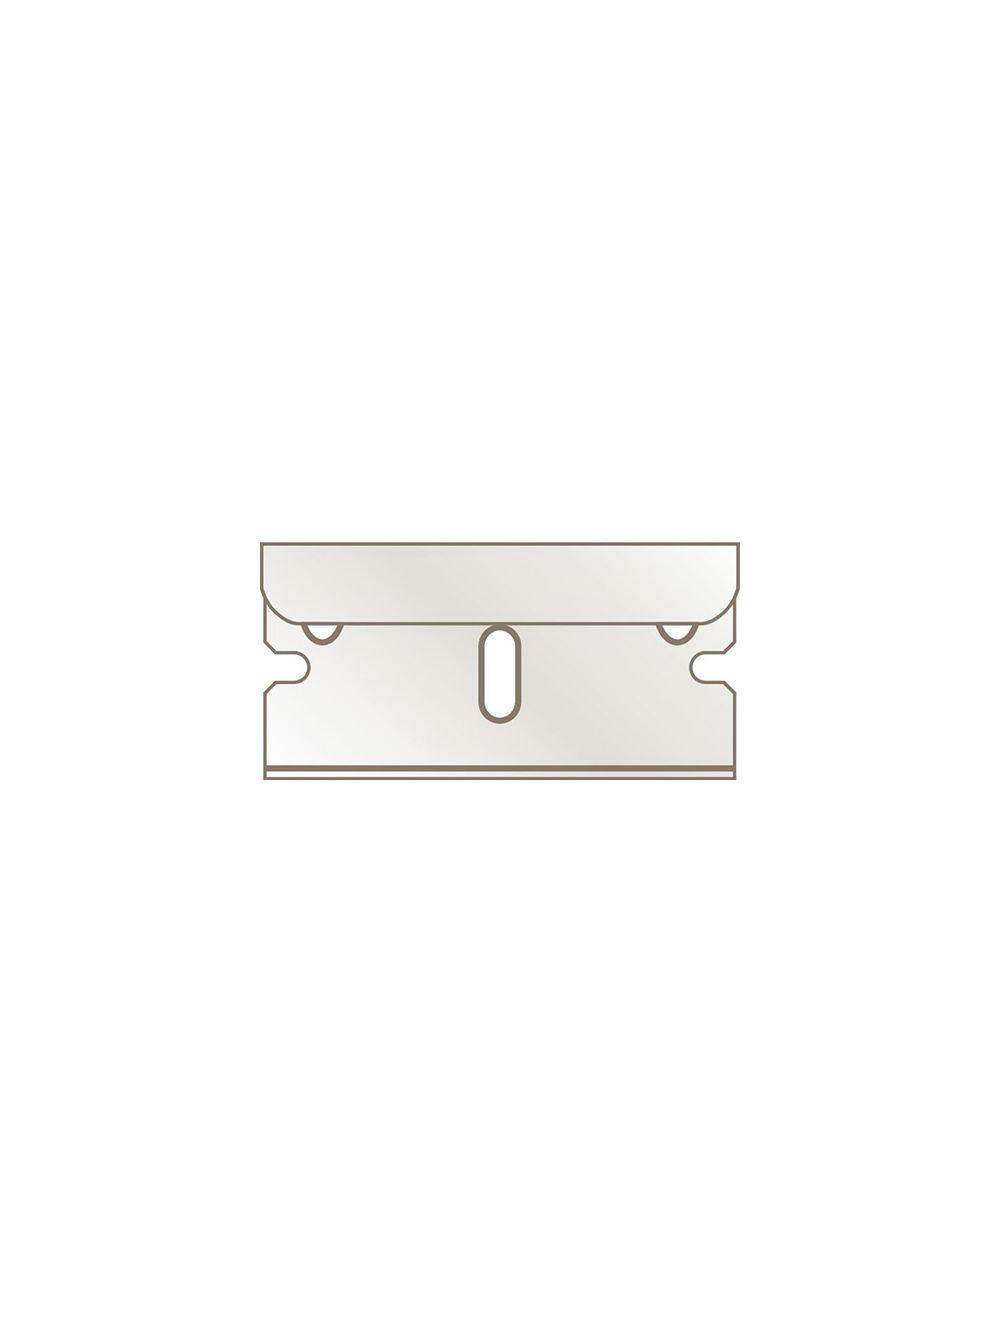 Martor Reinforced Razor Blade No. 144, 0.25 mm, Stainless (Pack Of 10)_0